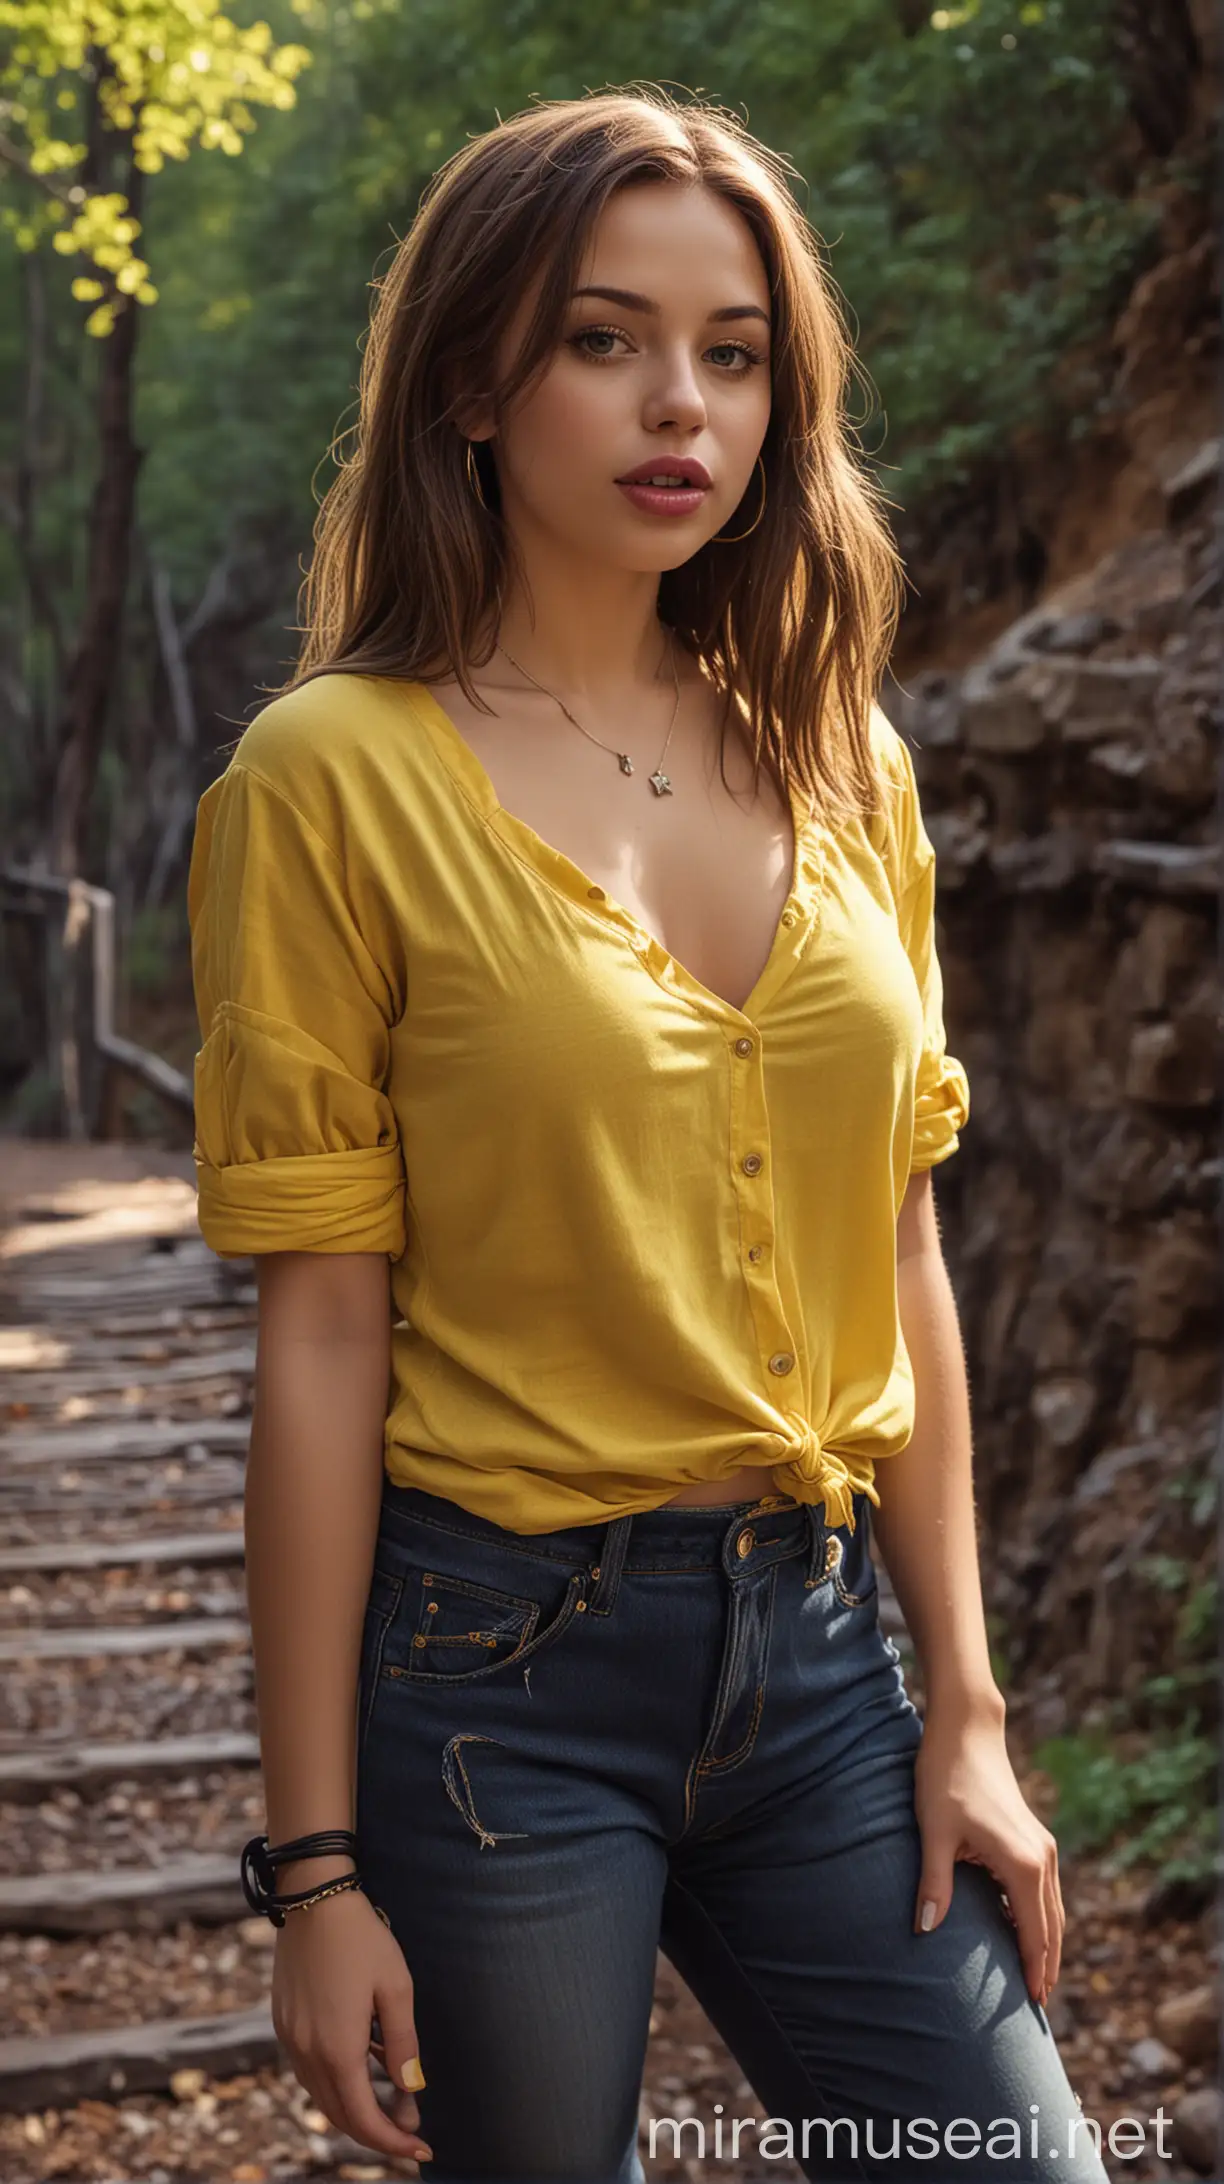 Stylish USA Girl with Brown Hair and Unique Accessories on Gorge Trail